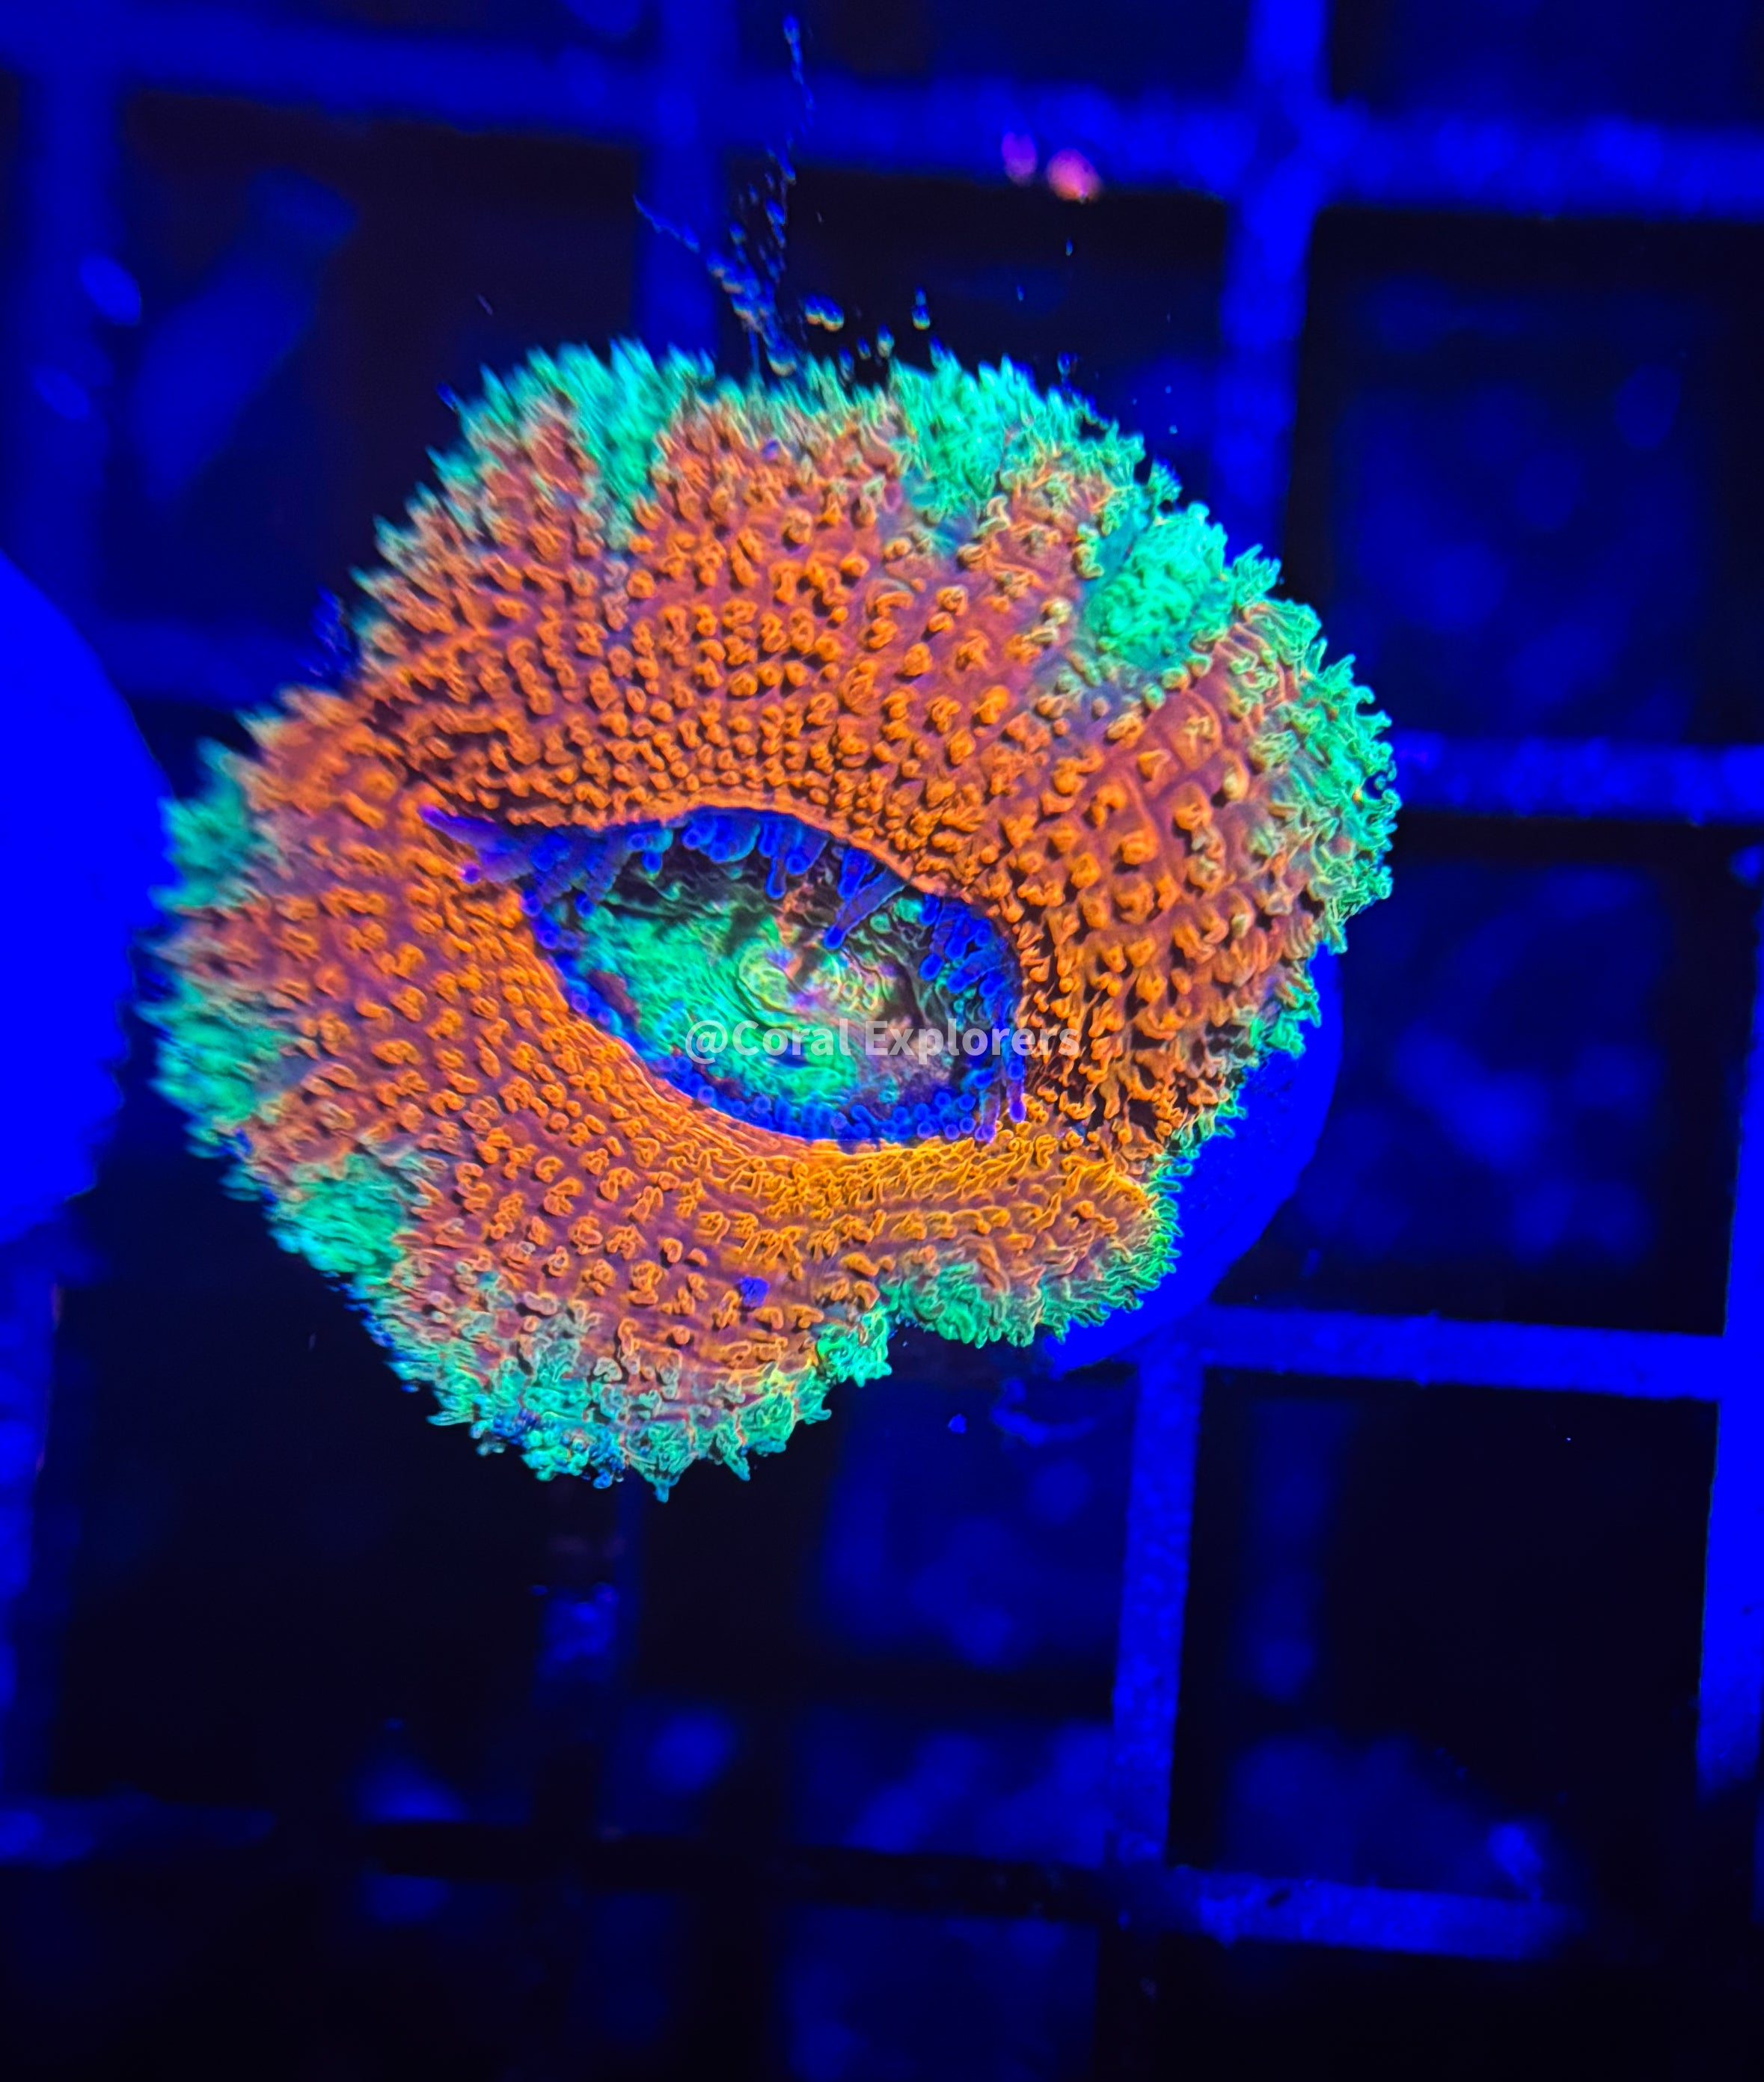 CE- WYSIWYG Tiffany Blue Acan Lord Micromussa Coral Frag LPS SPS #R1OB9